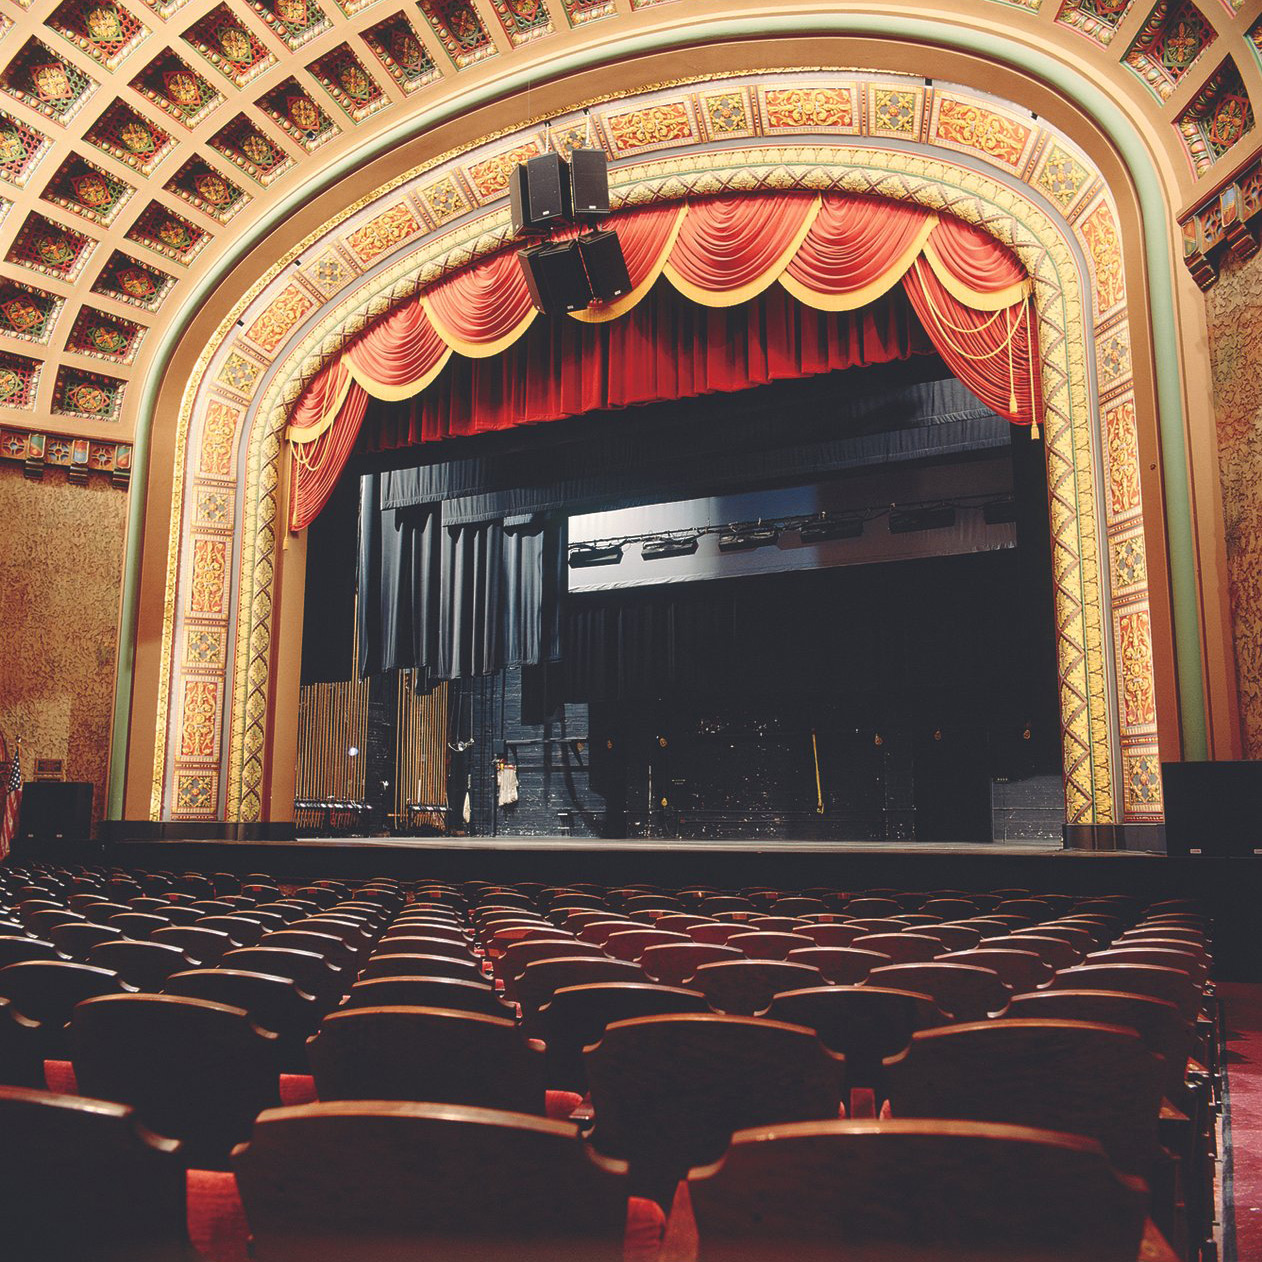 Inside view of Florida Theatre in Jacksonville